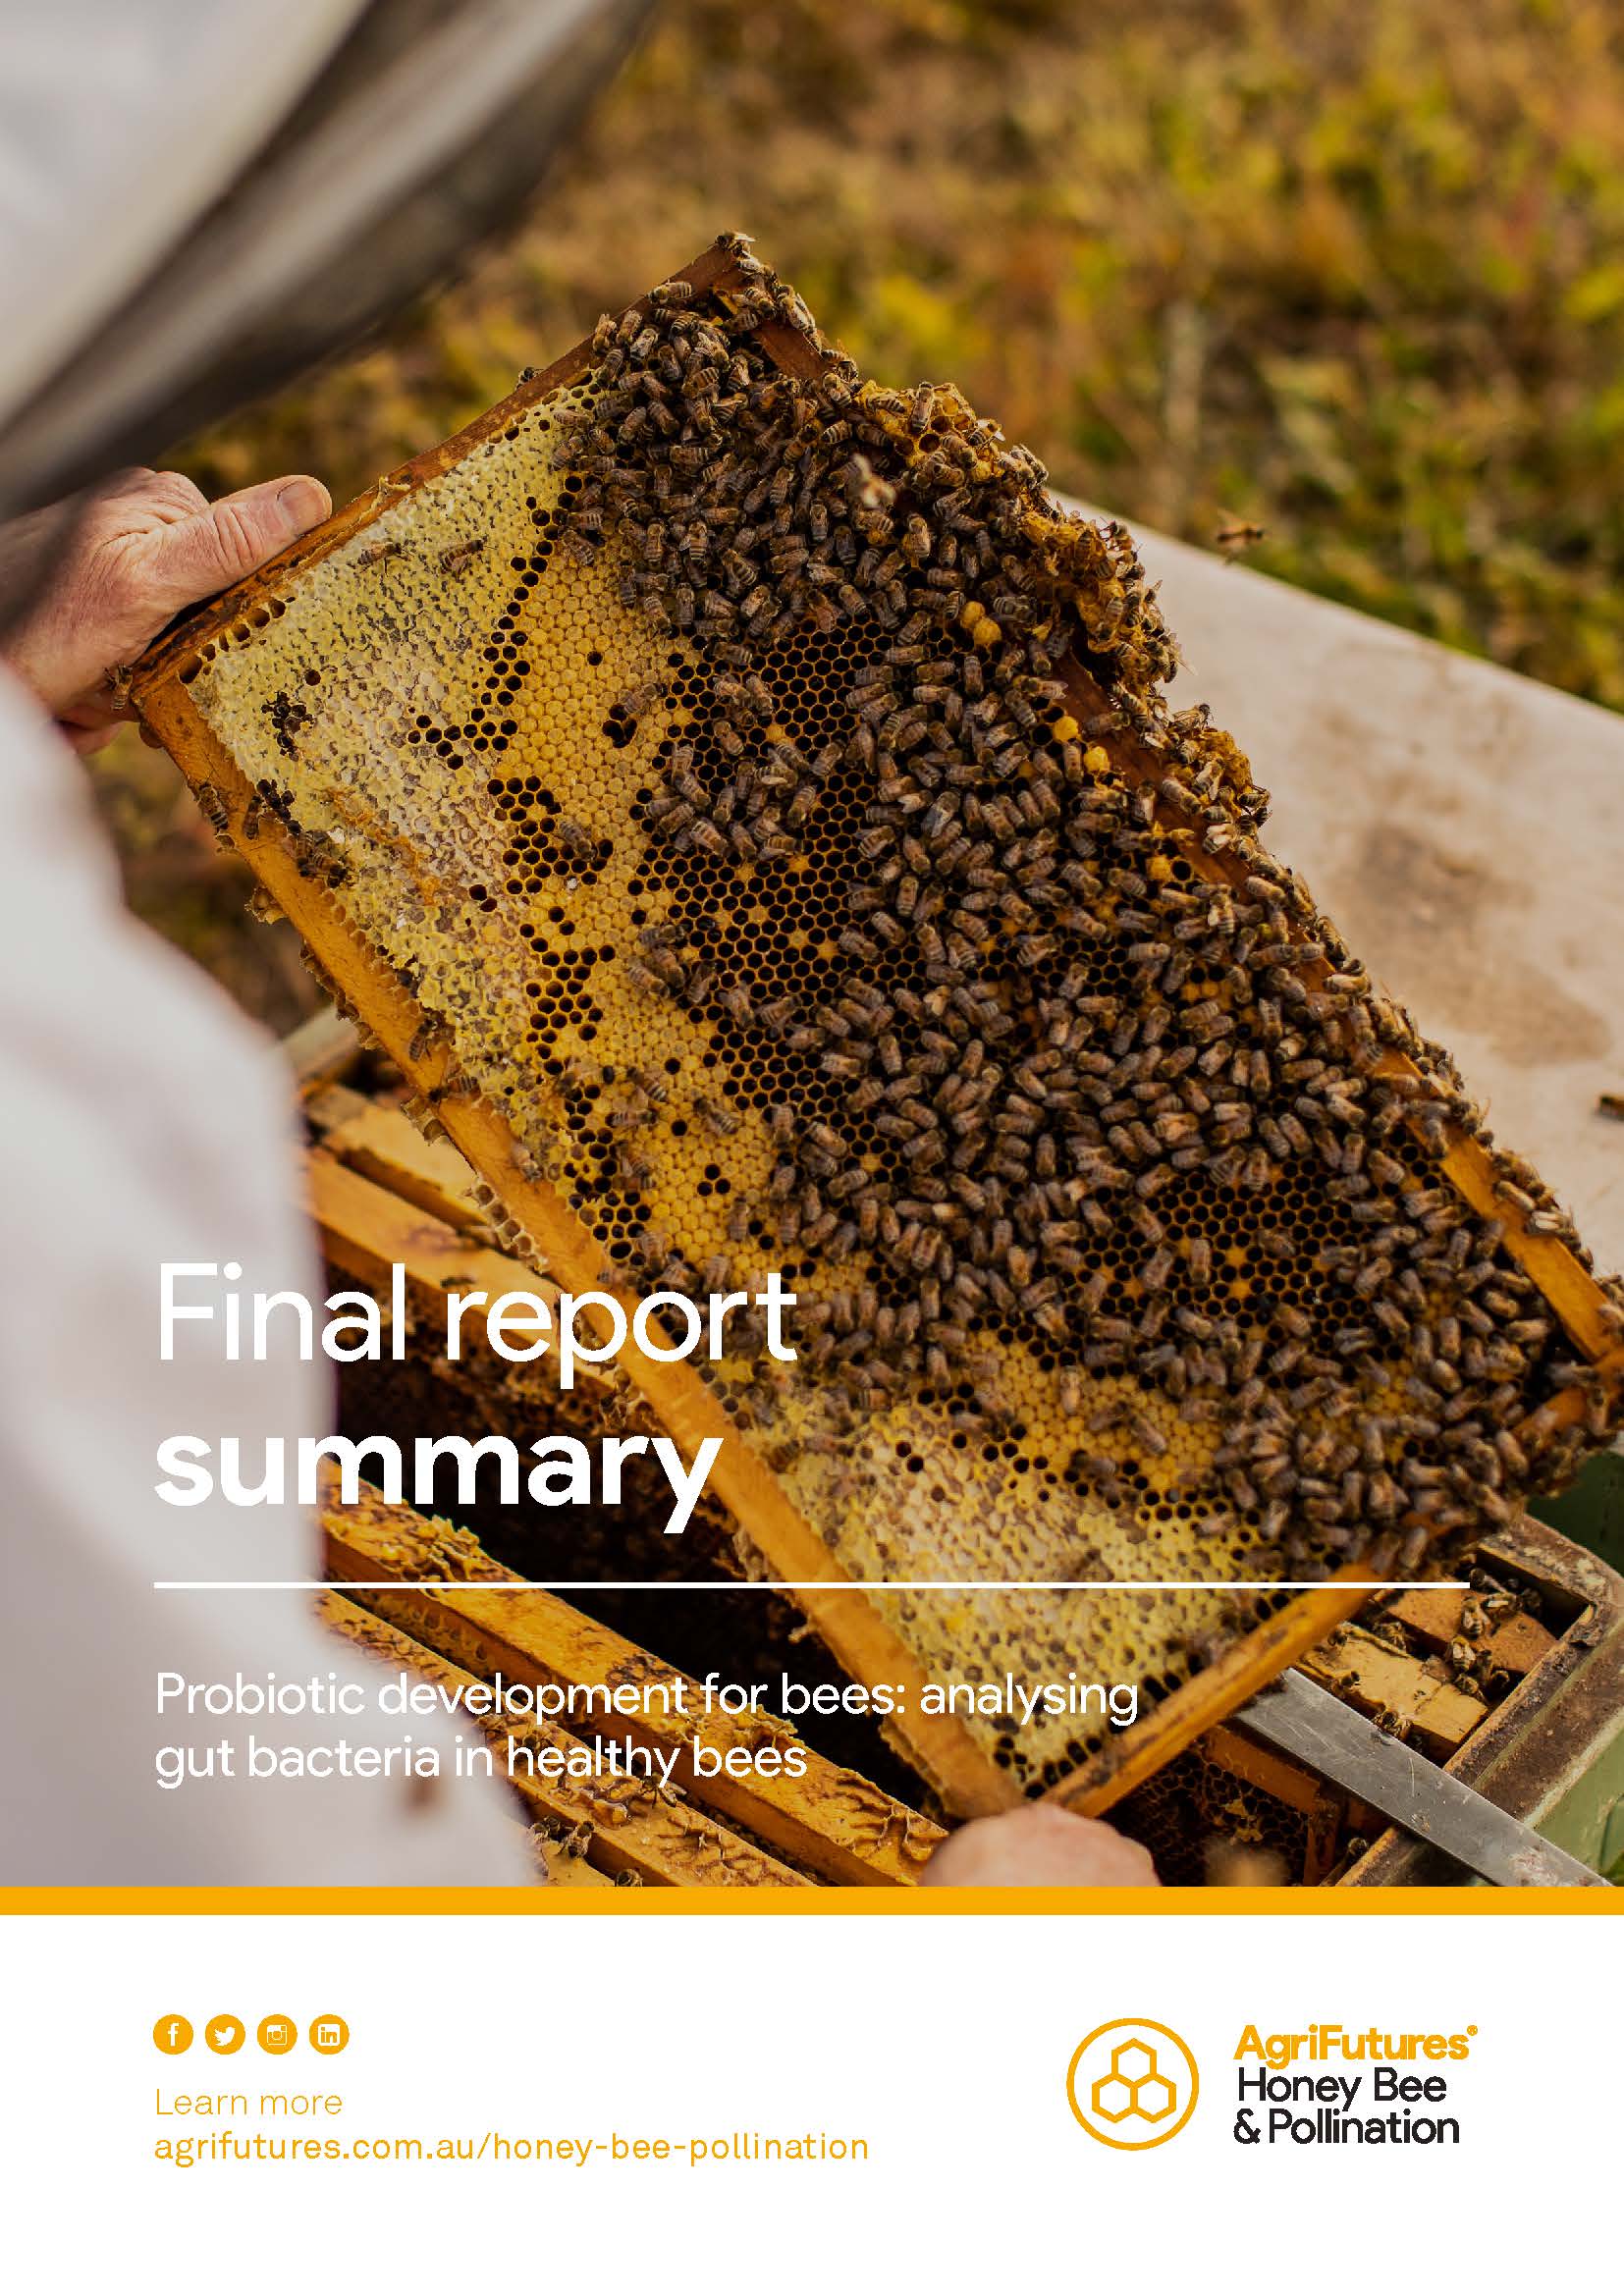 Final report summary: Probiotic development for bees – analysing gut bacteria in healthy bees - image